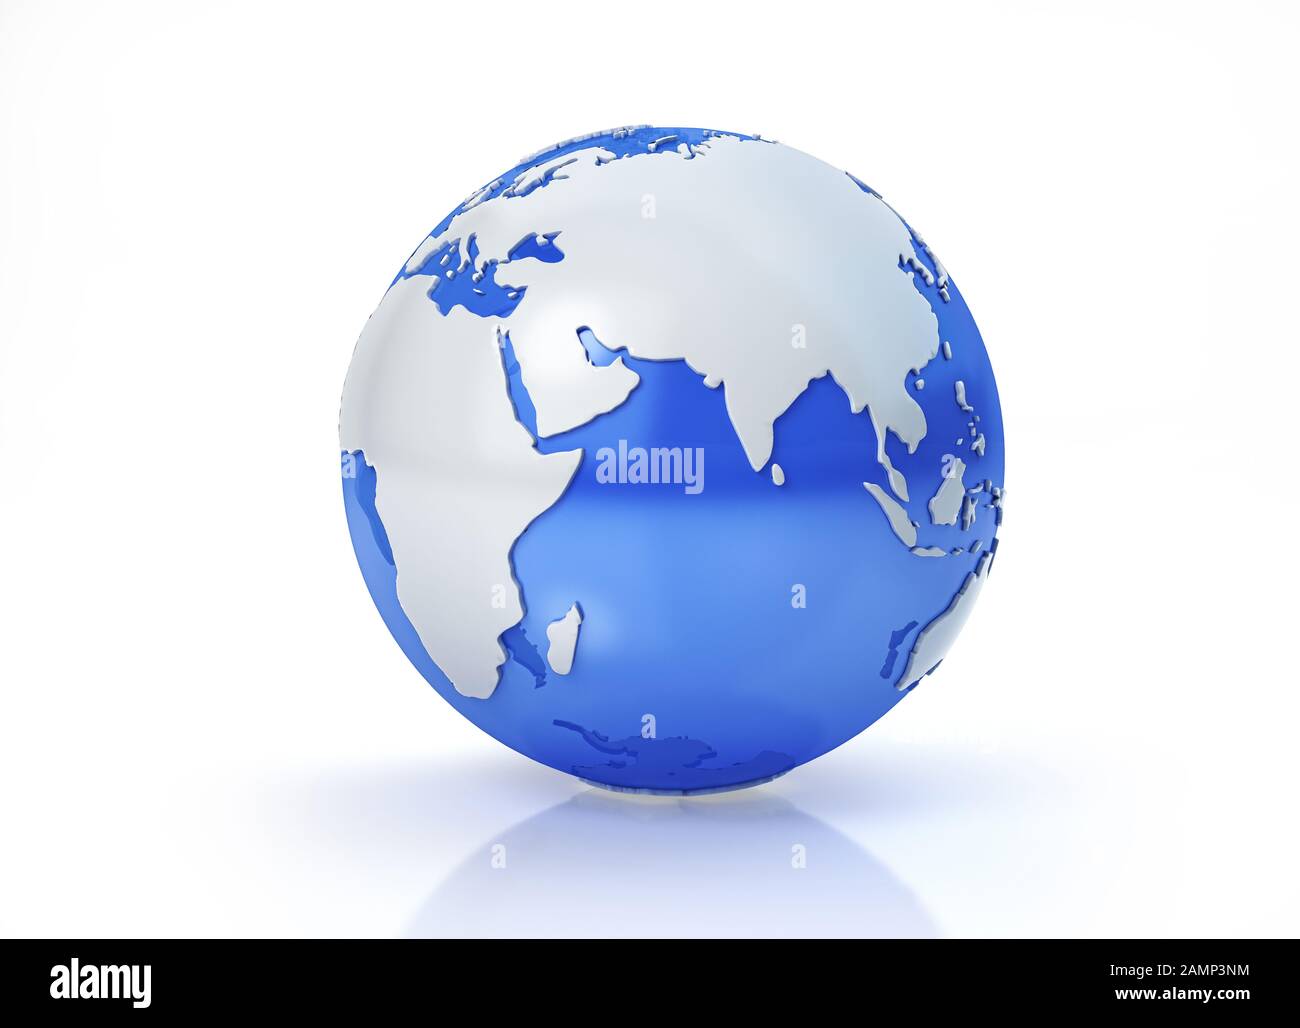 Earth globe stylized. Grey continents in relief. With transparent seas to reveal continents on the other side. On white background. Asia view. Stock Photo